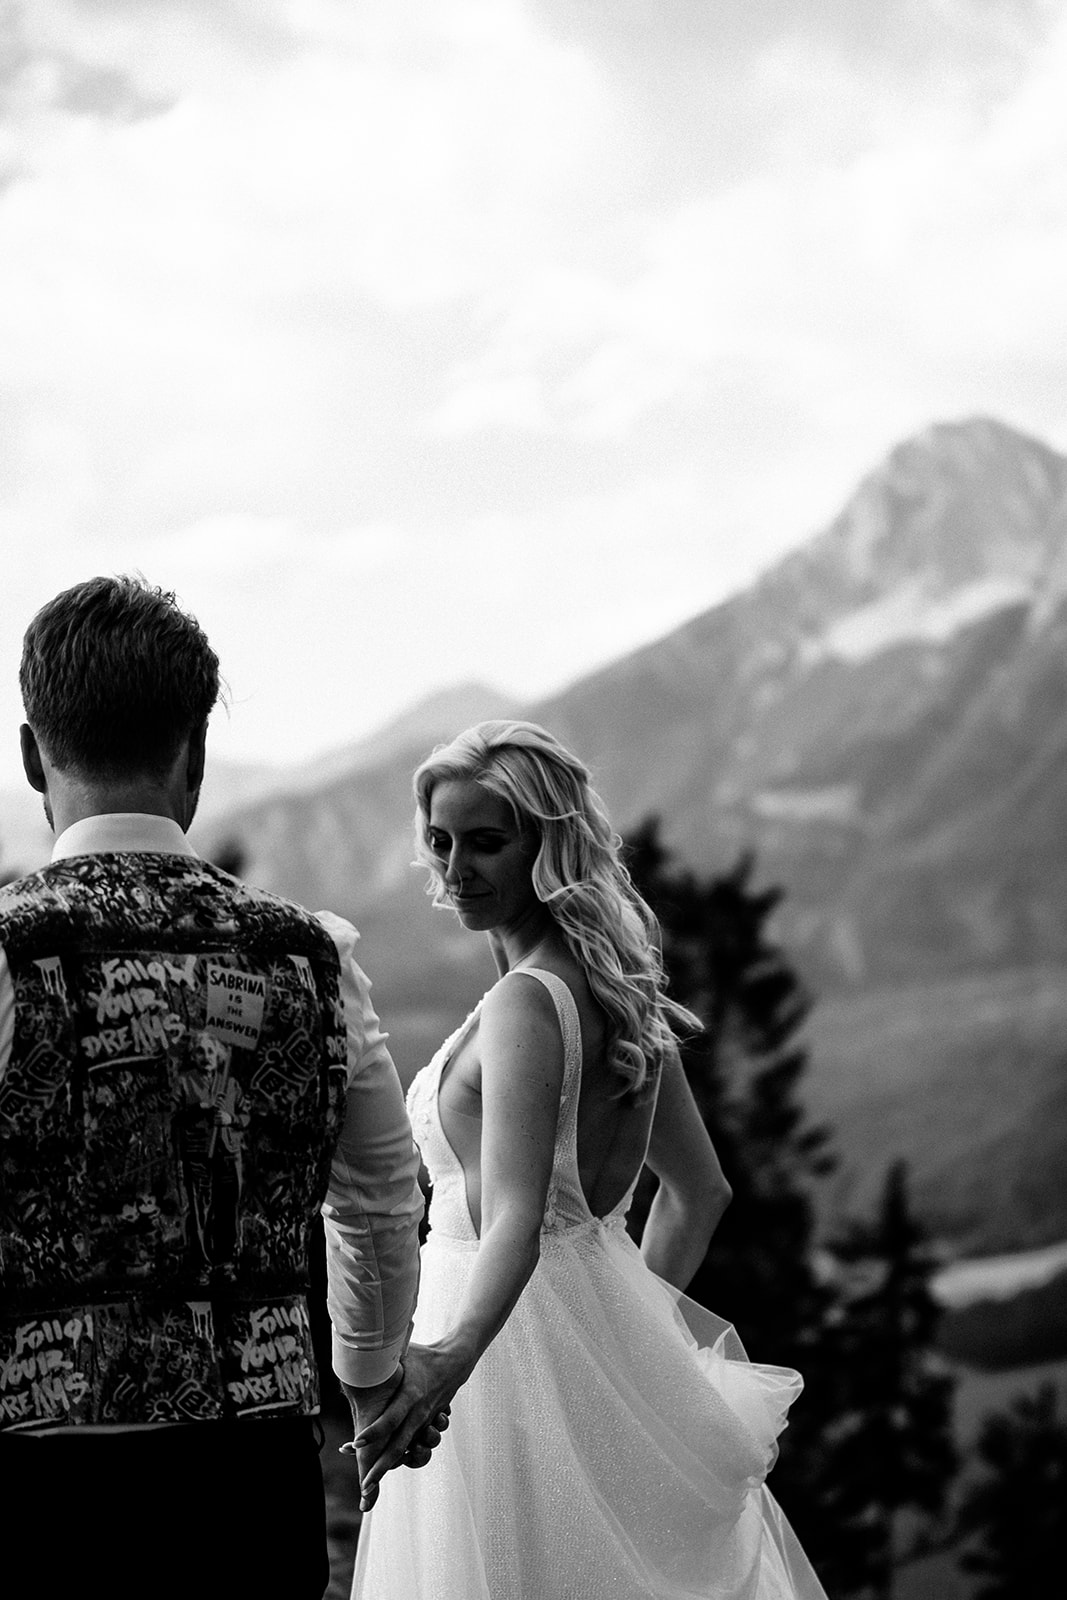 Destination wedding of a mountain loving couple at the Alps of Austria